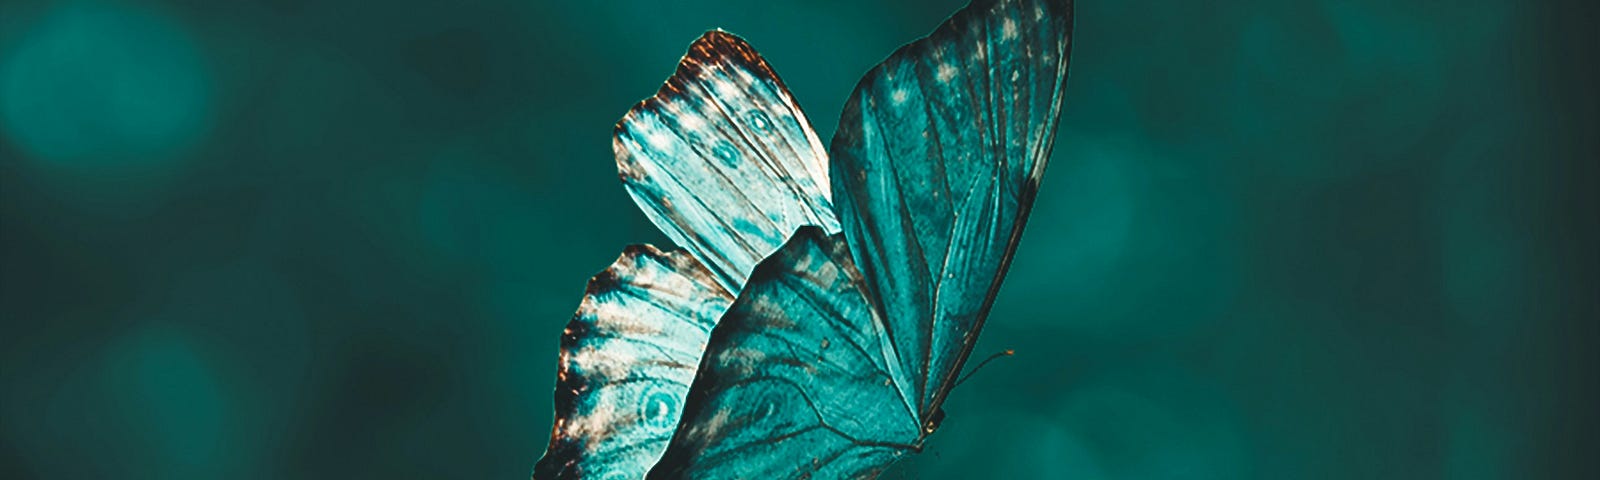 butterfly flying, green hues